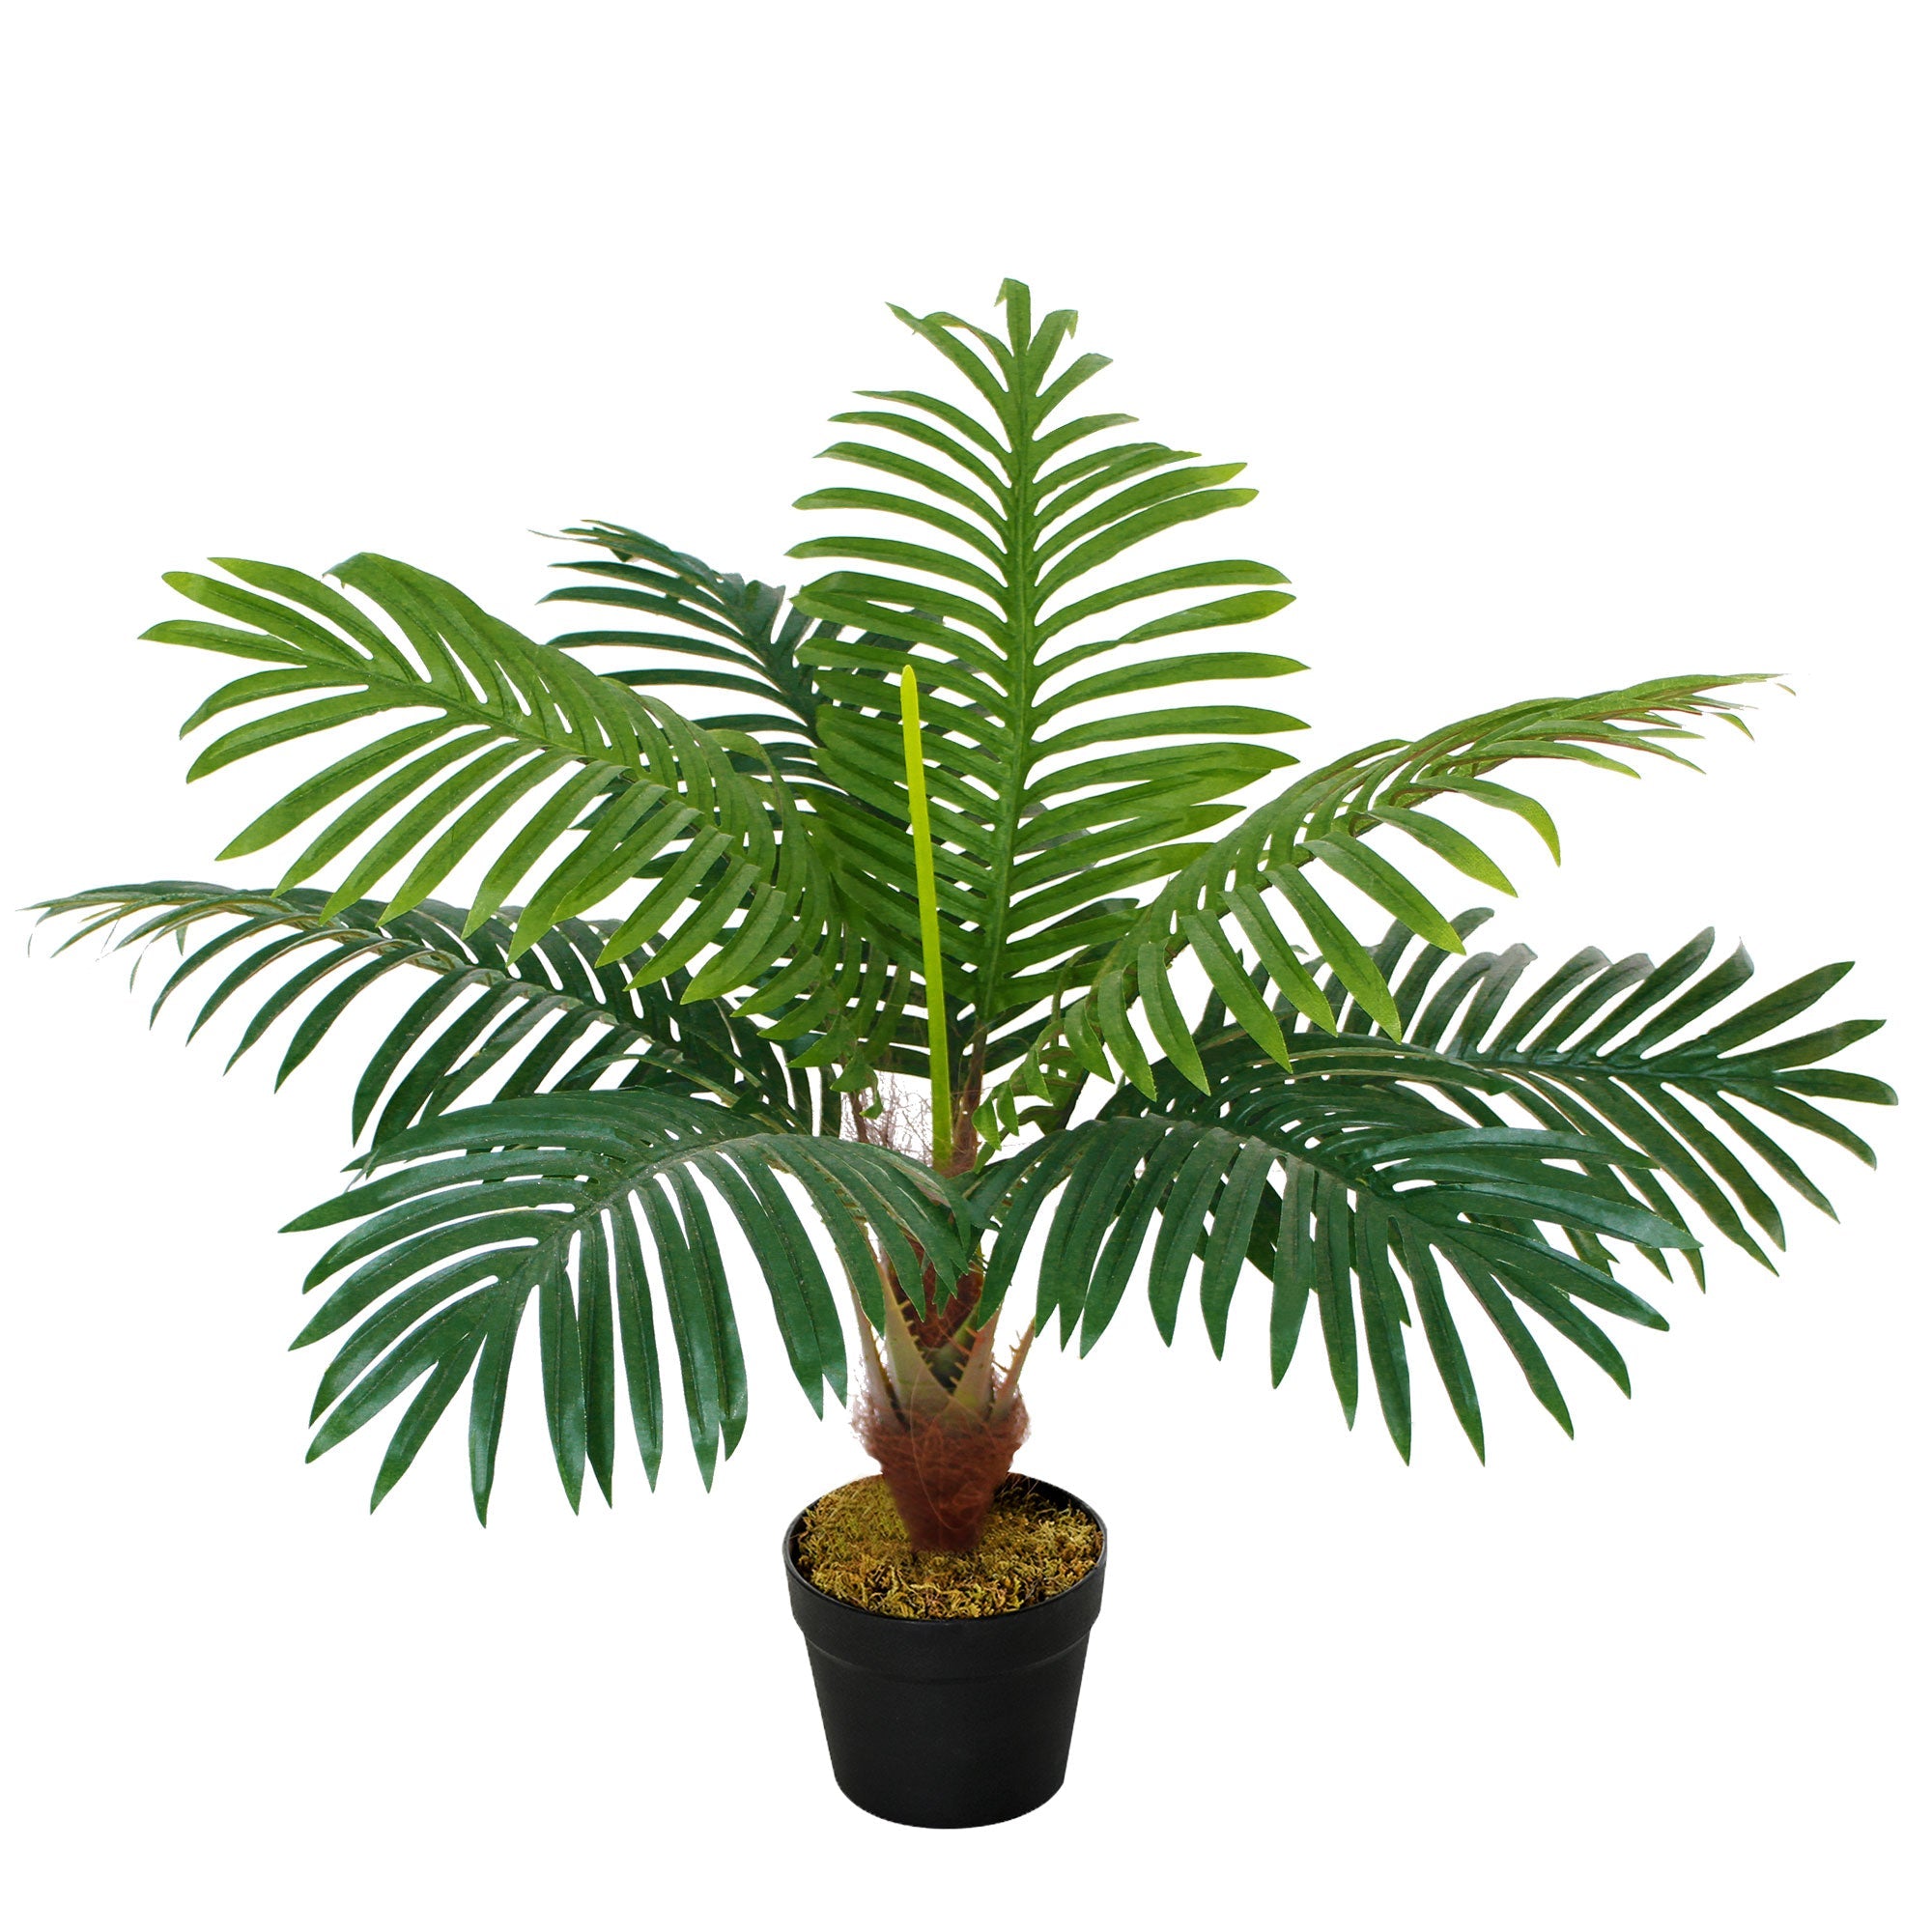 Artificial Palm Tree Decorative Plant 8 Leaves with Nursery Pot, Fake Tropical Tree for Indoor Outdoor Décor, 60cm-0